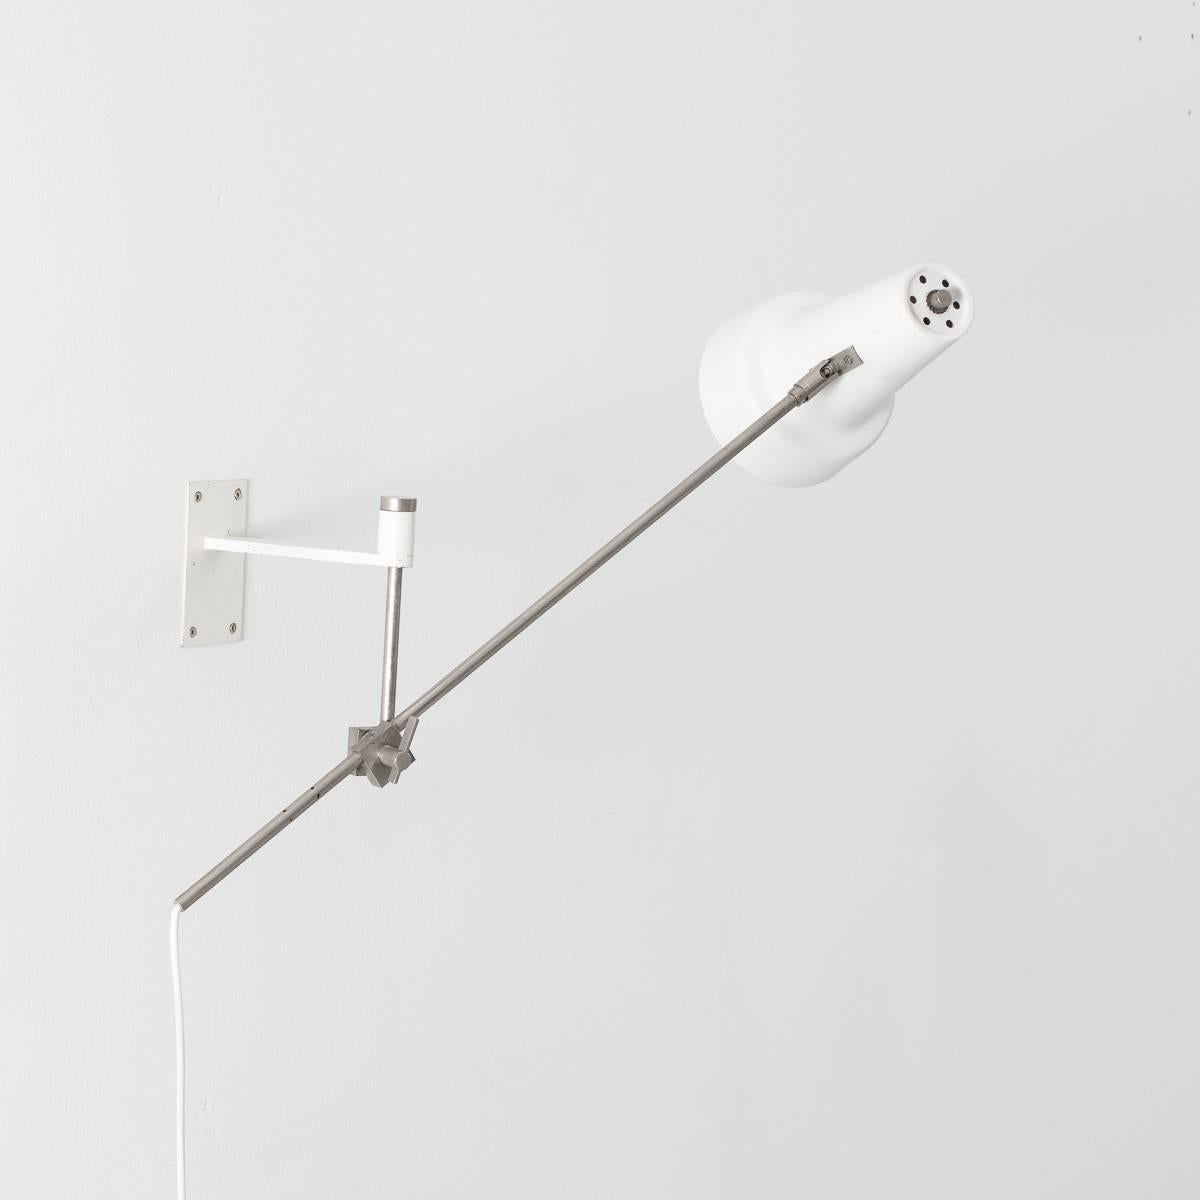 A model 55 white wall lamp with a nickel mechanism and articulated hood. Designed by one of the more obscure yet no less talented Dutch lighting designers of the era, Willem Hagoort. Unusually the lamp is hung beneath the bracket. 

The paintwork